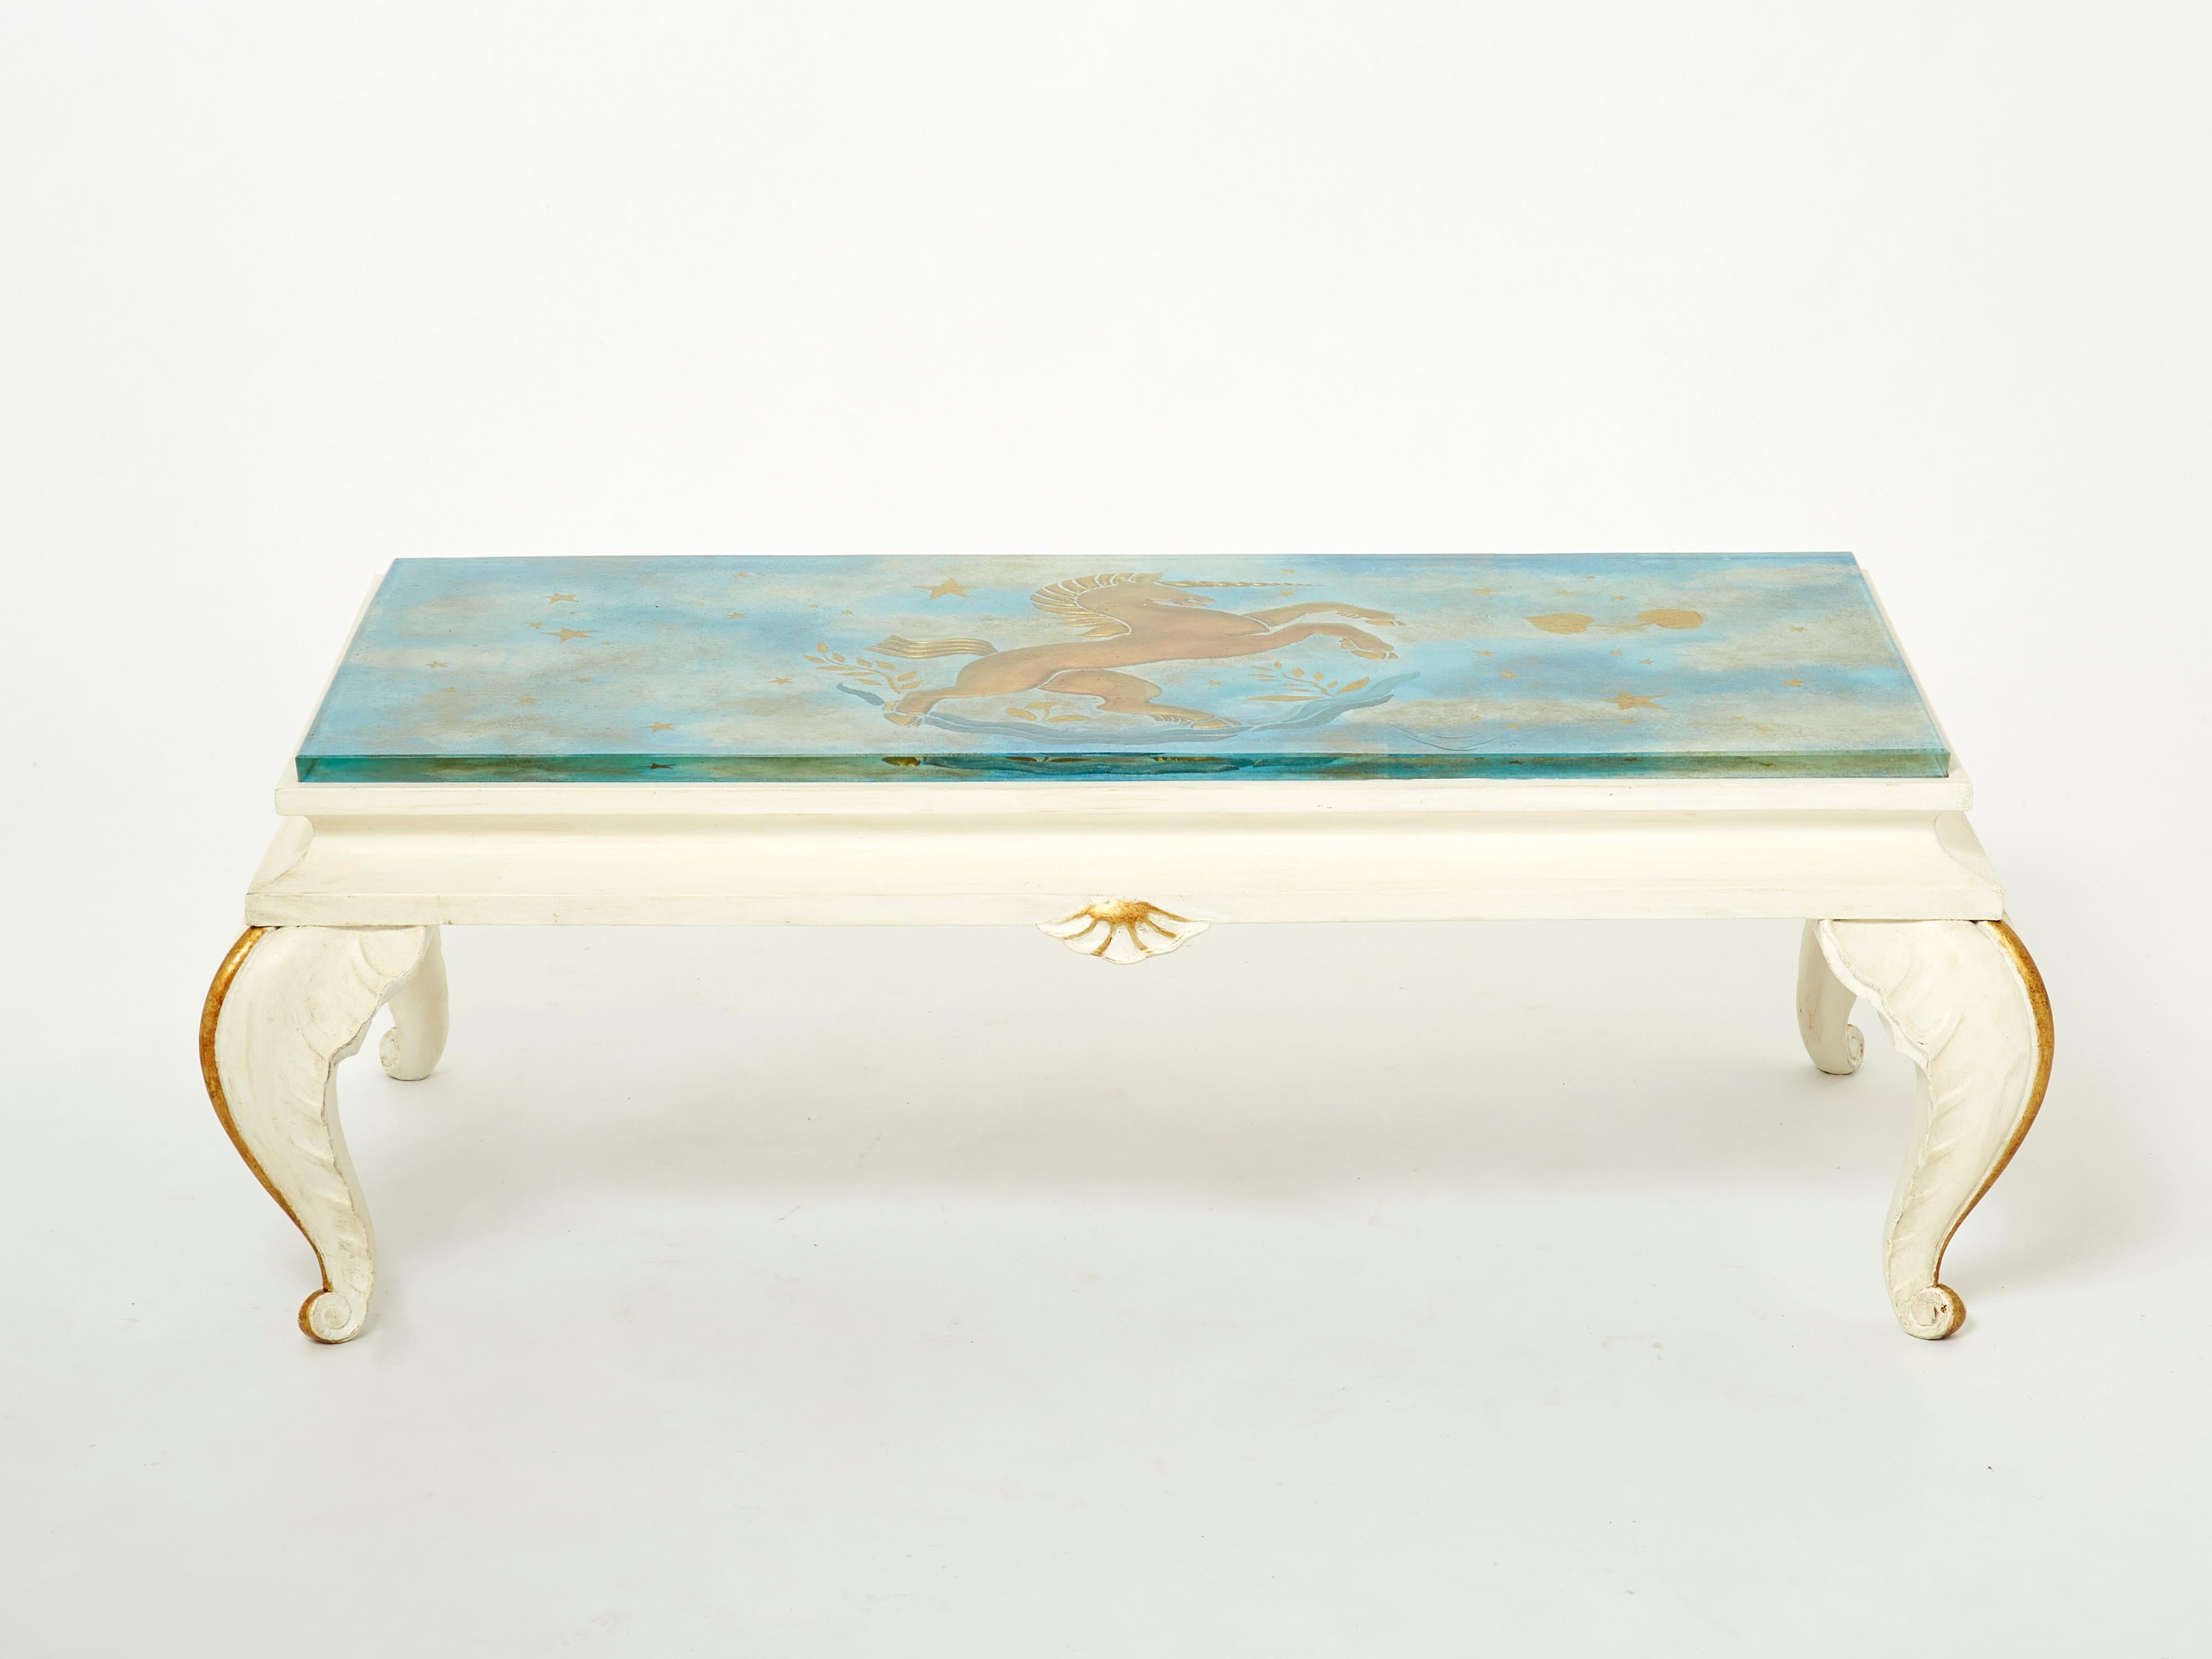 Maison Jansen Gilded Wood Painted Glass Top Coffee Table, 1950 For Sale 5